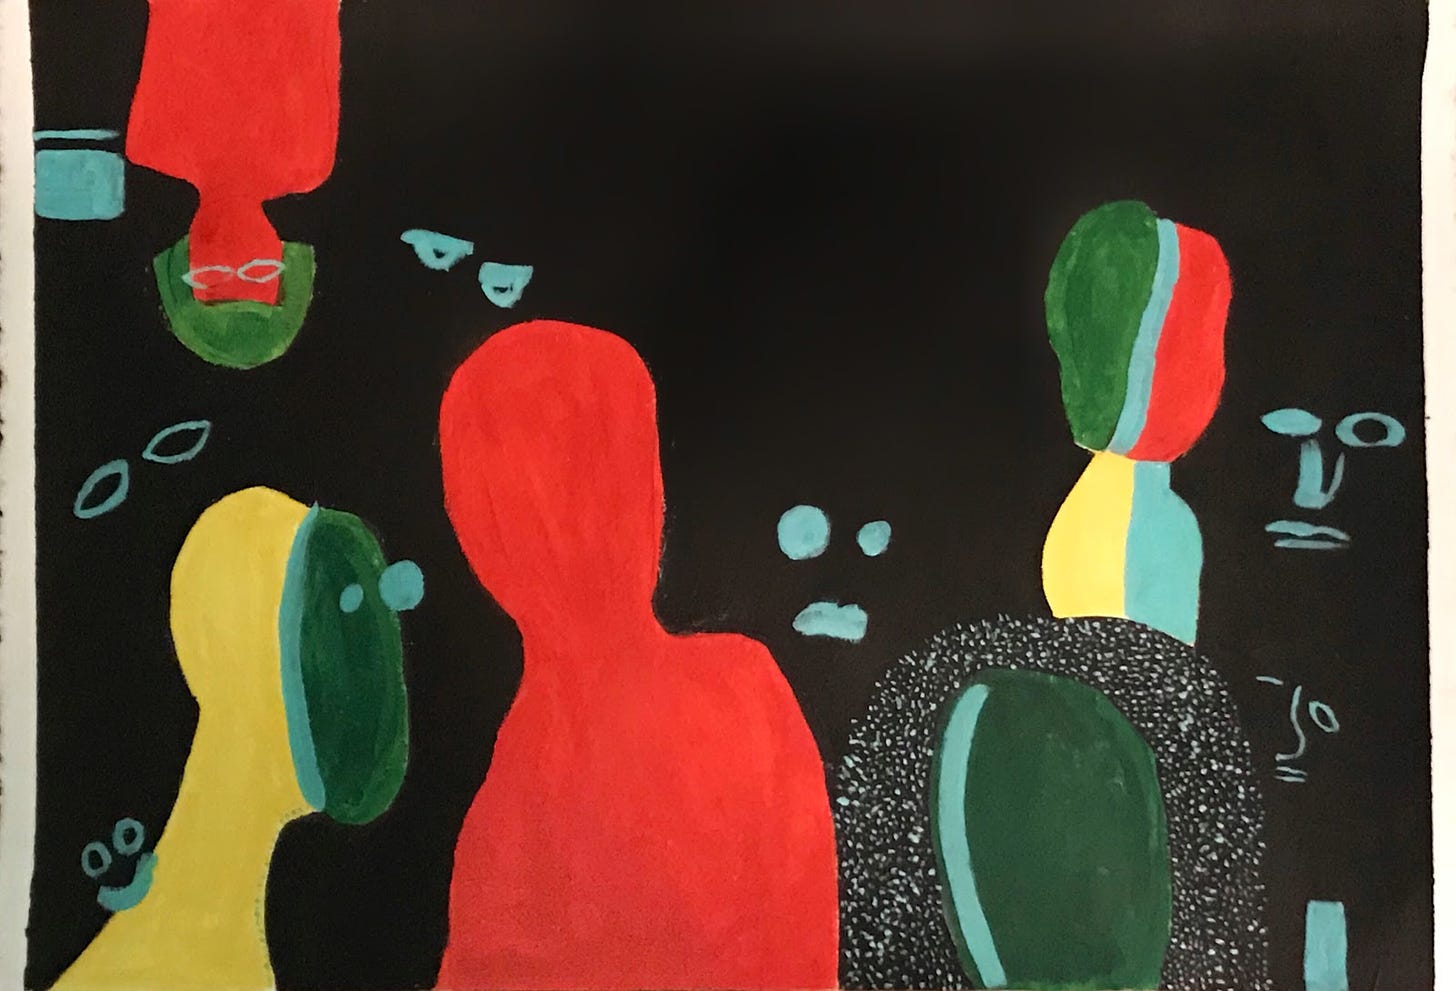 In the black background of the piece, there are ghostly blue expressions staring at us. In the forefront, there are five humanoid figures: on the top left there is an upside down red figure with green hair and glasses, on the bottom left there is a right side up figure with a yellow back and bluish-green face, in the middle of the frame there is a fully red figure with no facial features, on the right bottom corner there is a dark green figure with spotted black hair, and finally on the top right there is a multicolored figure (green, blue, red, and yellow). 